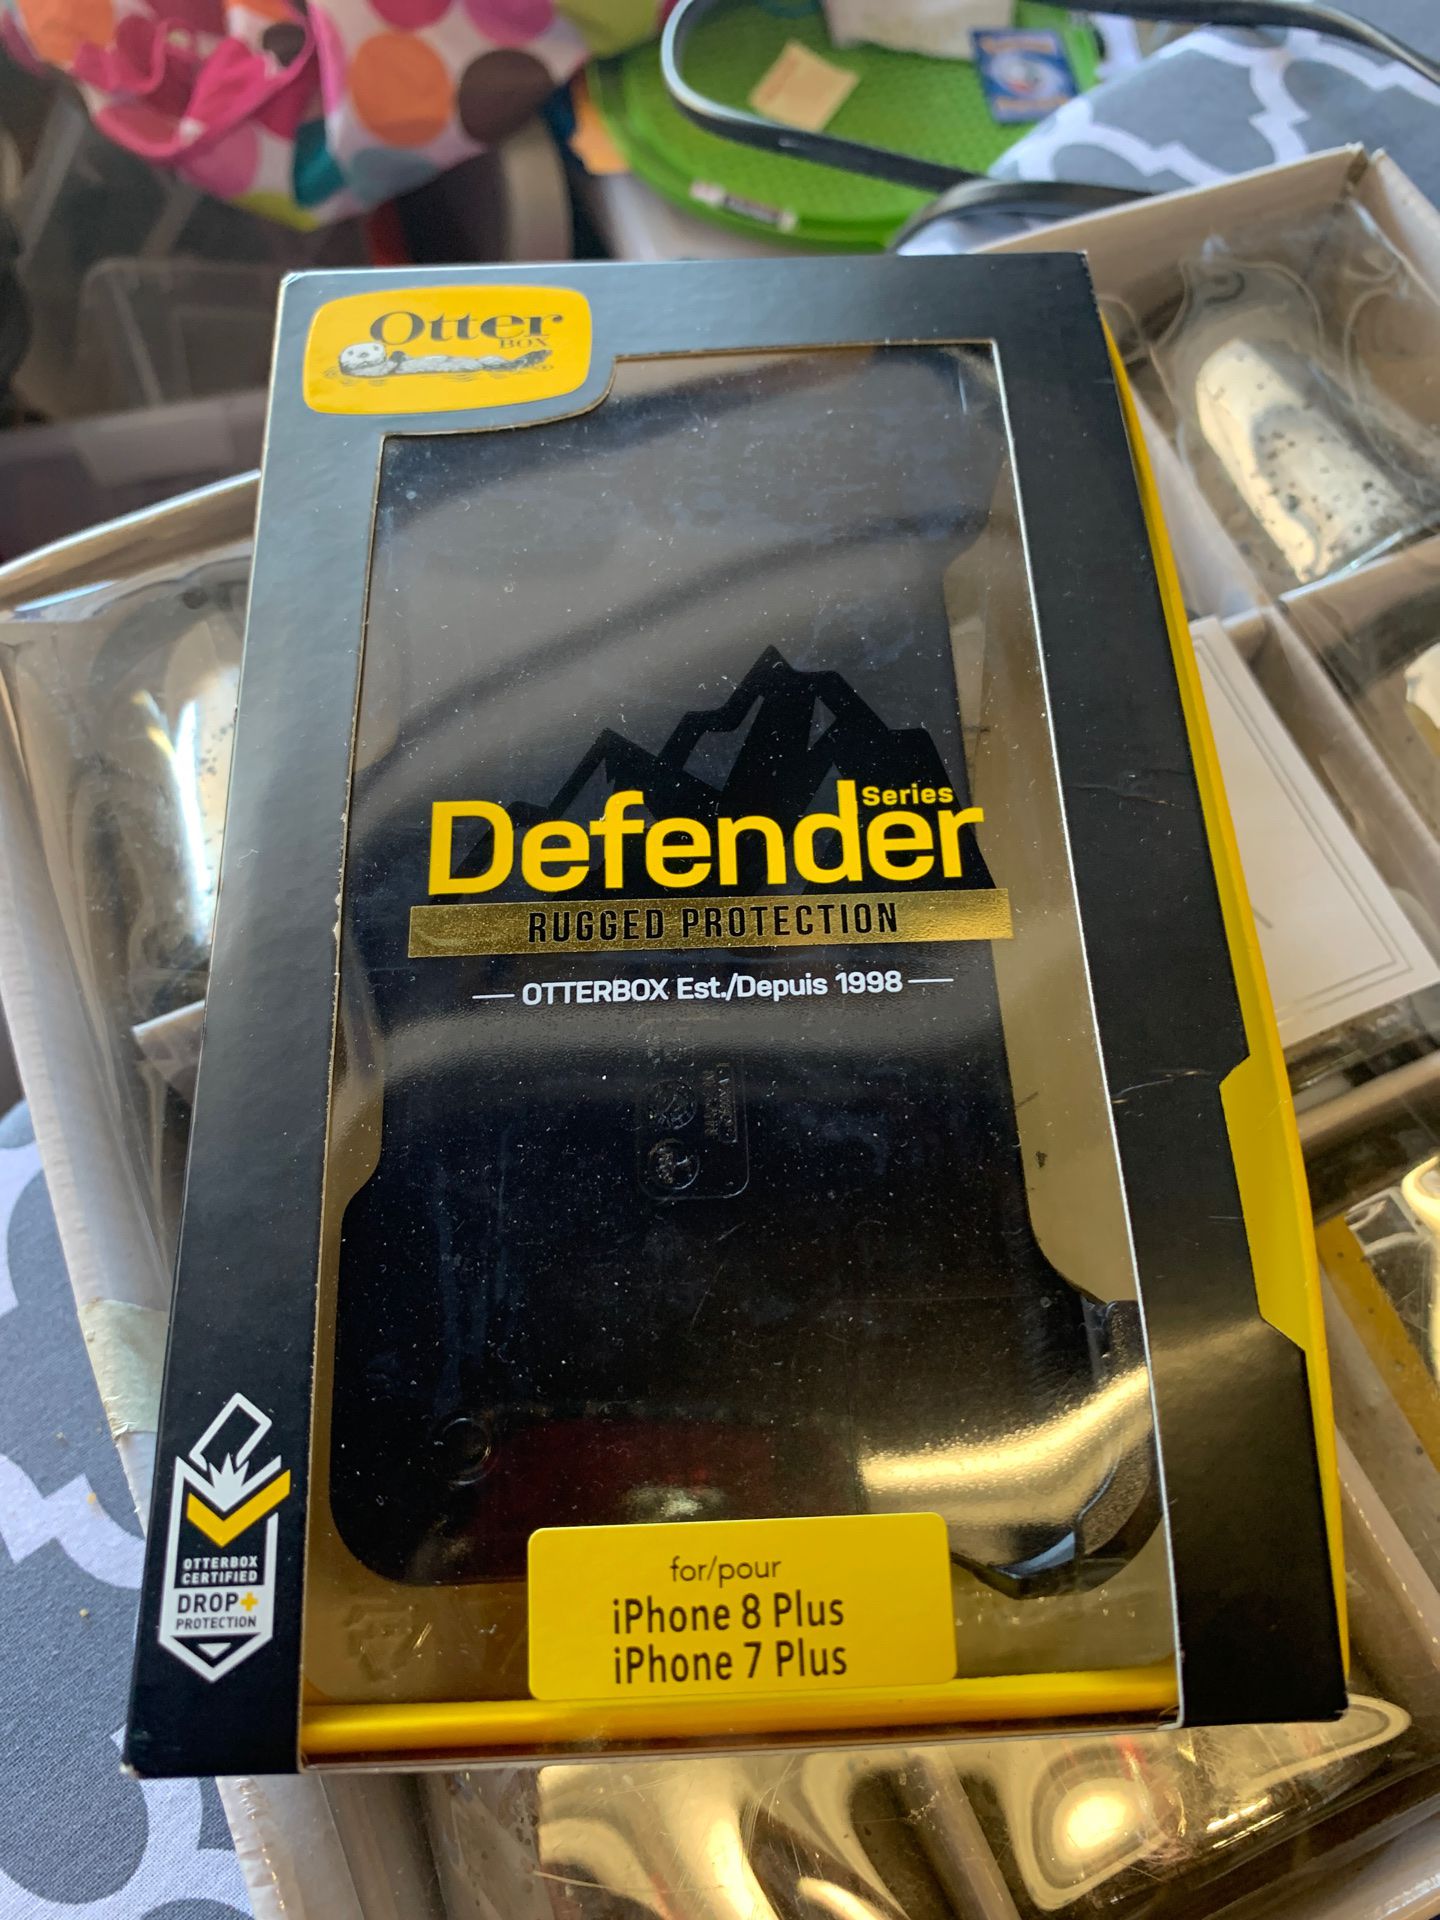 otter box defender rugged protection phone case clip... iphone 7/plus